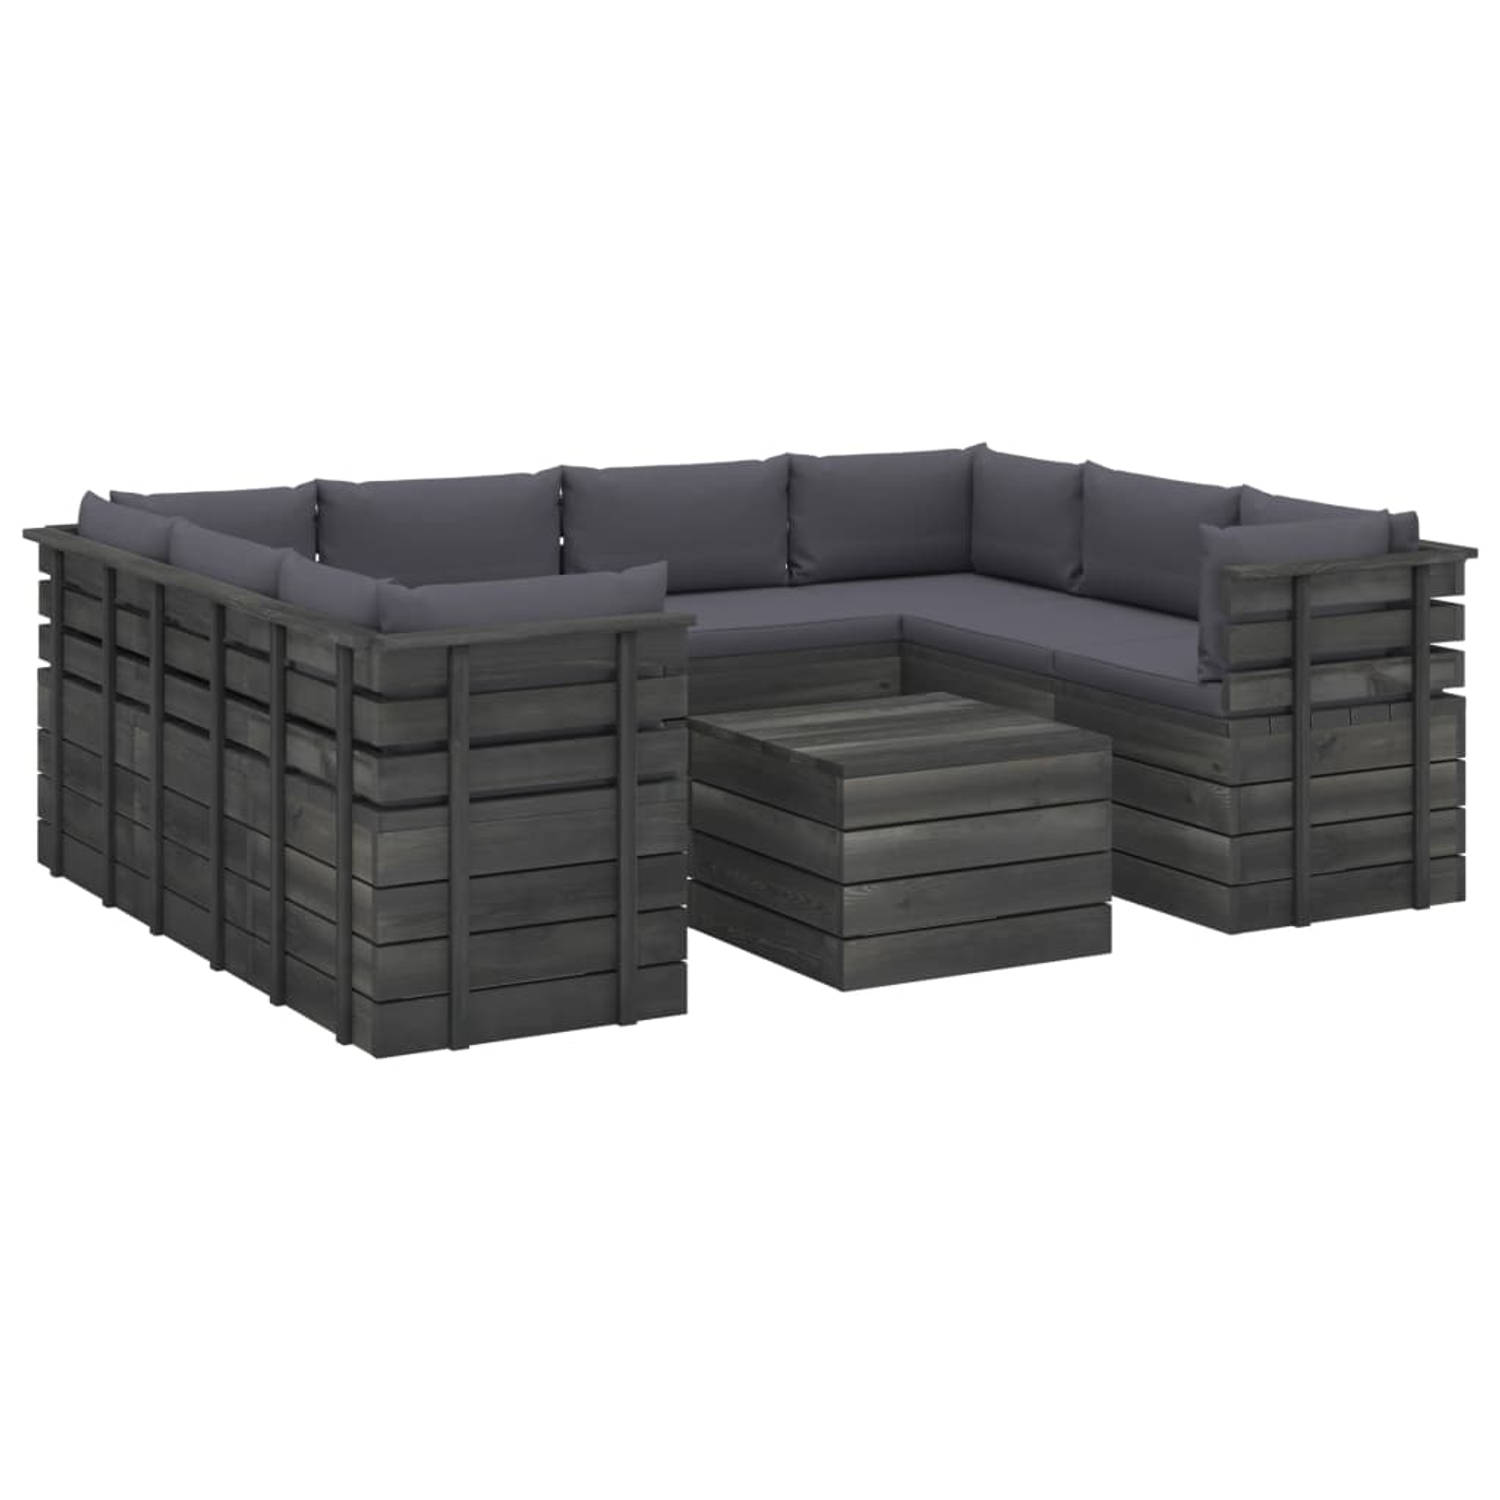 The Living Store Tuinset - Pallet - Hout - Grenenhout - Antraciet - 60x65x71.5 (BxDxH) - 100% polyester aanbieding